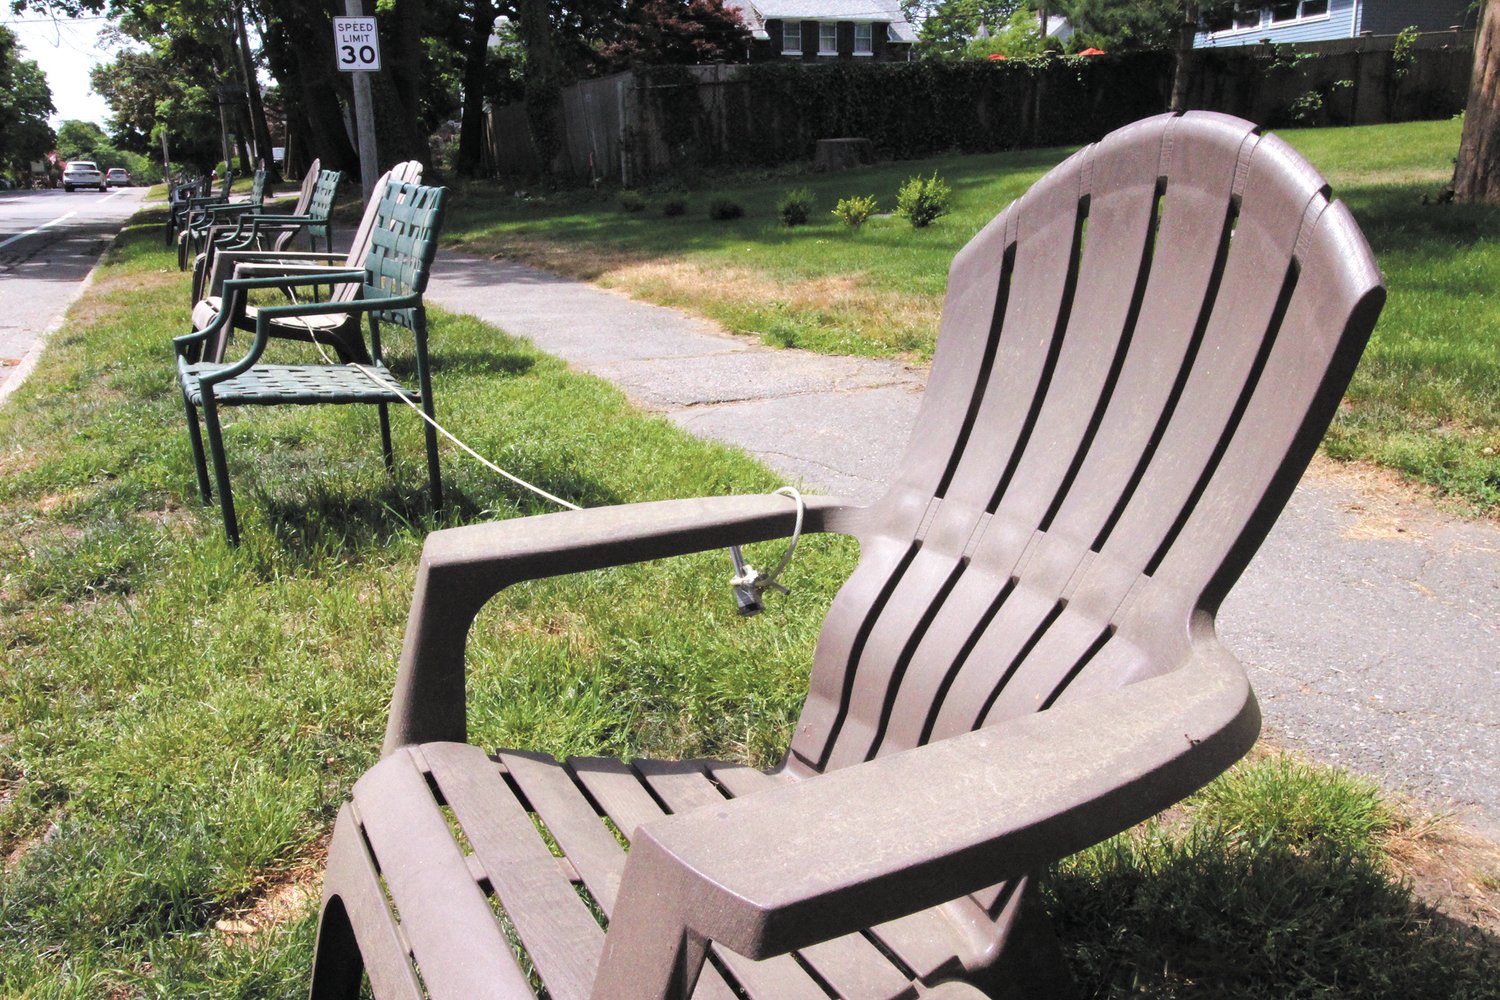 LOCKED IN SEATING: In anticipation of Saturday’s Gaspee Days parade, chairs started appearing along Narragansett Parkway Tuesday. Topping it off, these chairs were secured with a lock.  (Warwick Beacon photo)